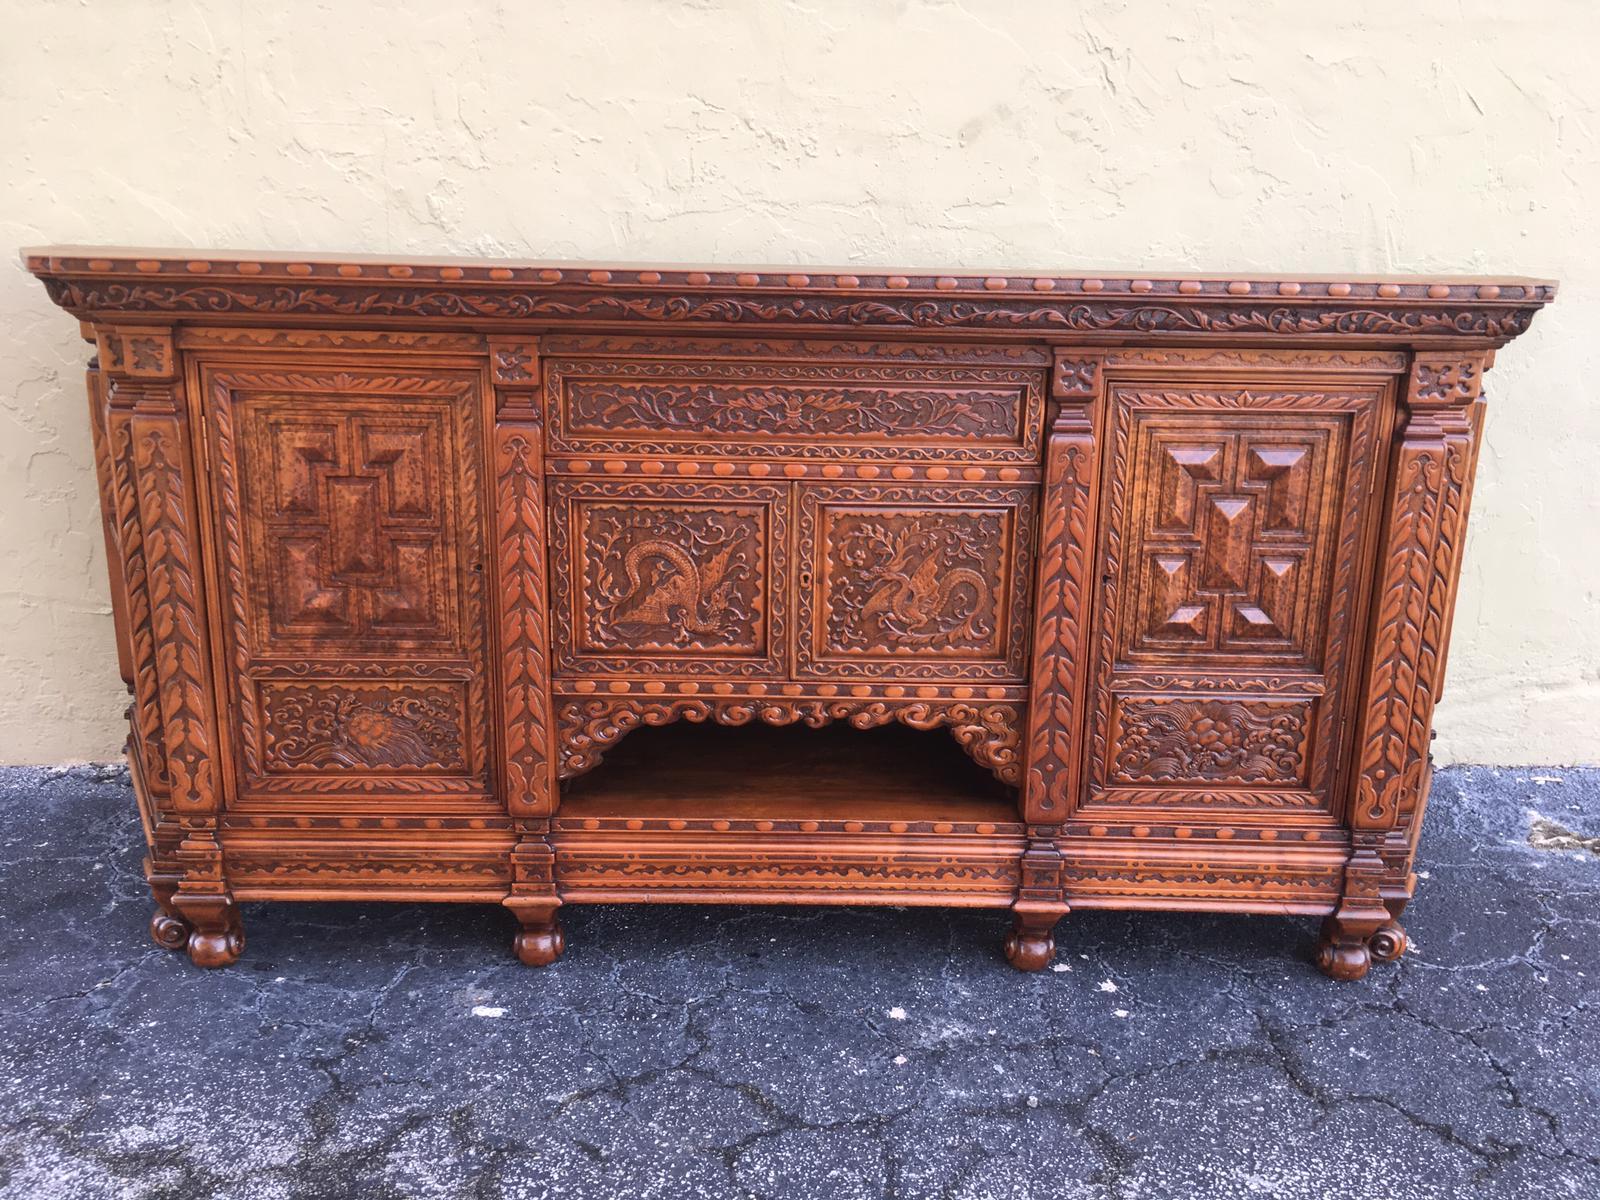 Monumental antique hand carved elmwood cabinet. Sideboard, 20th century.
This listing it´s only for the low cabinet, without the up vitrine.